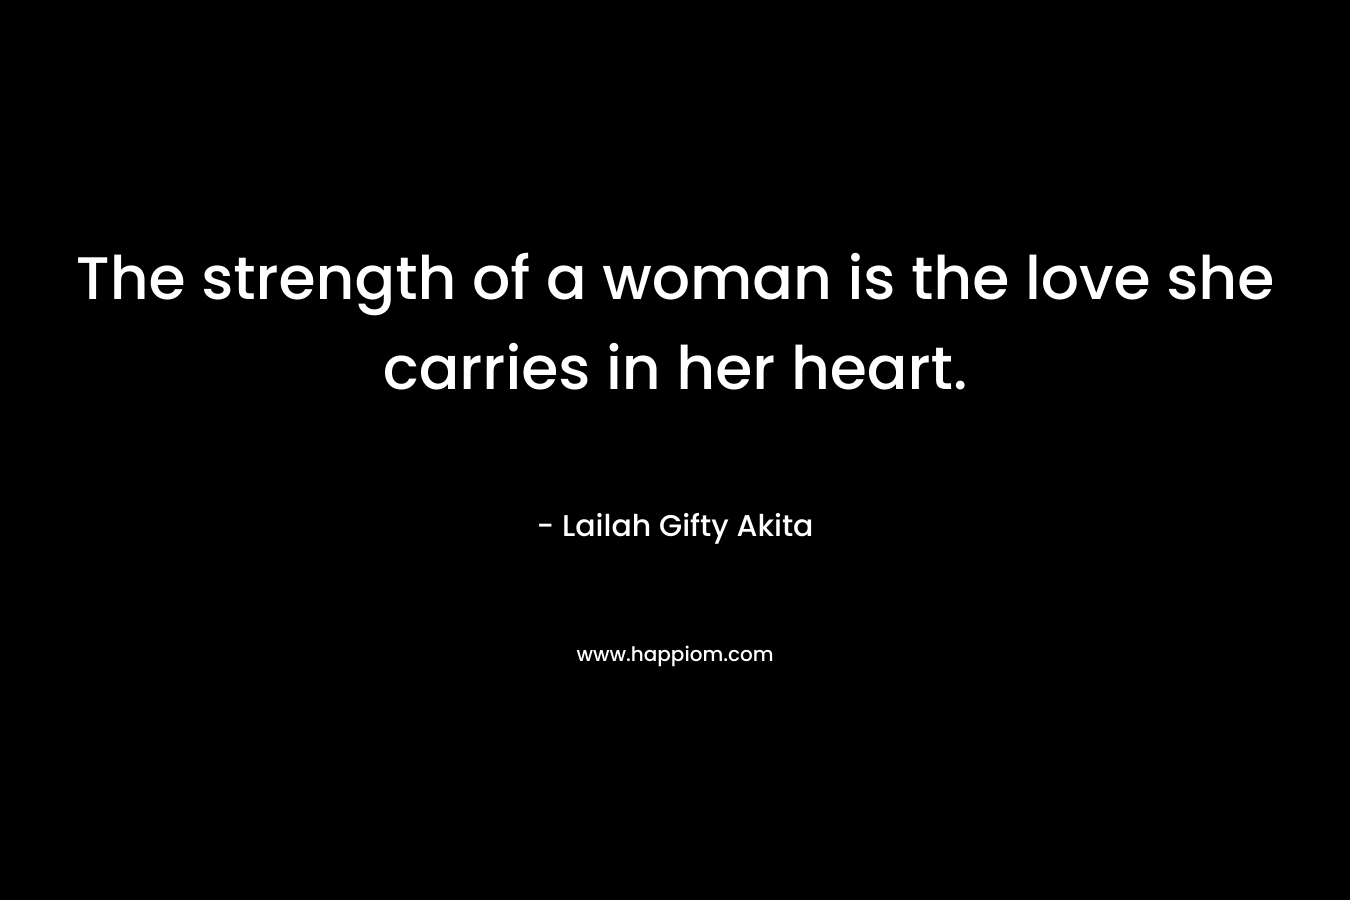 The strength of a woman is the love she carries in her heart.